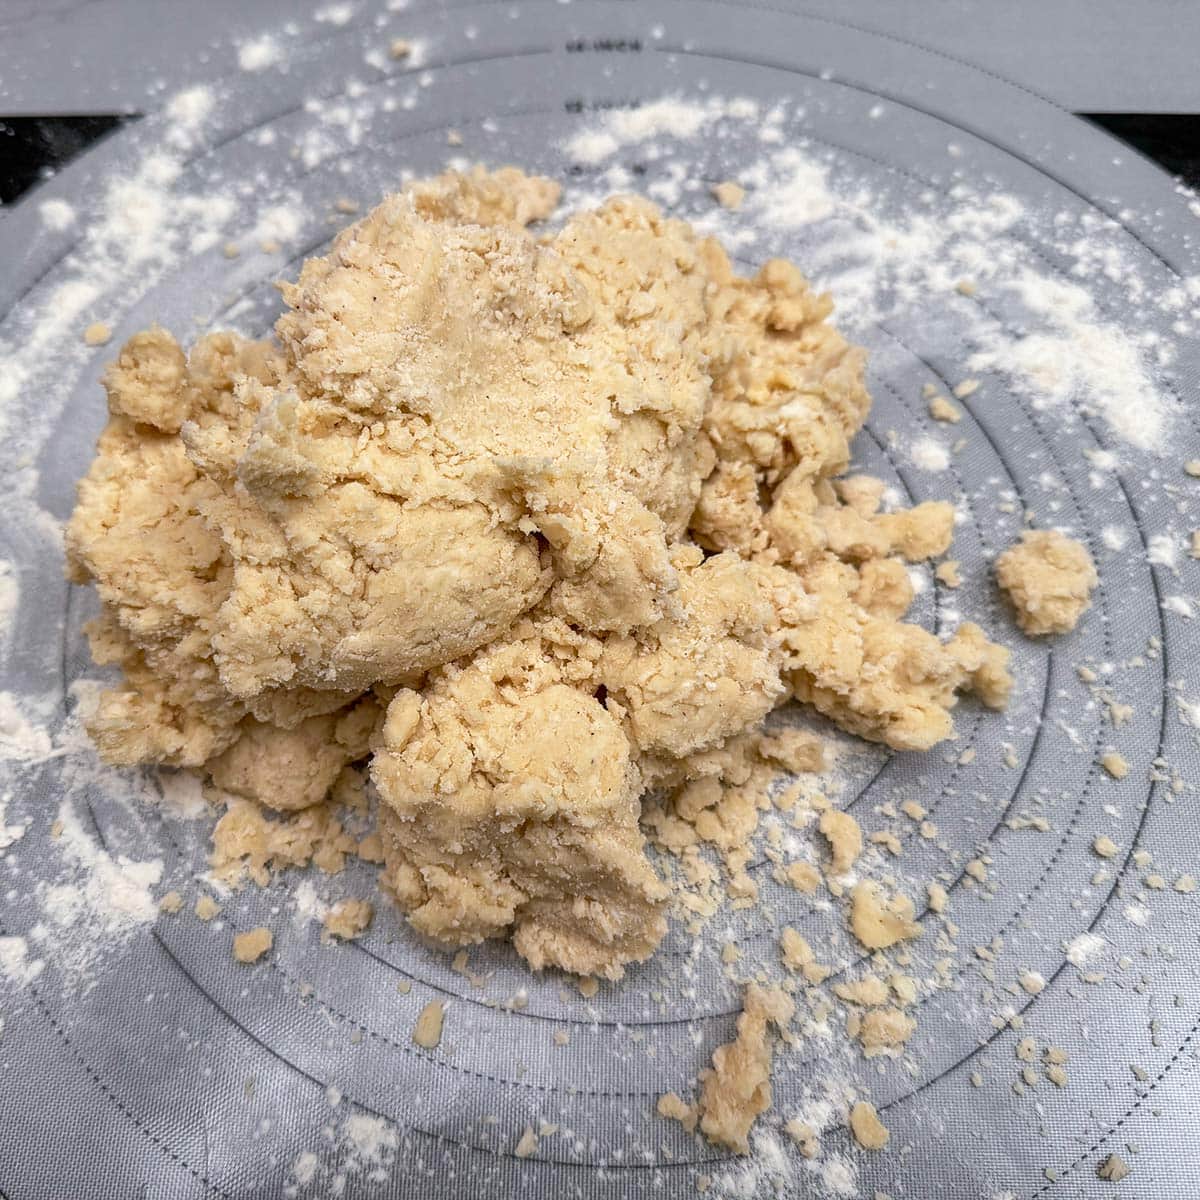 Pile of cookie dough before kneading it together.